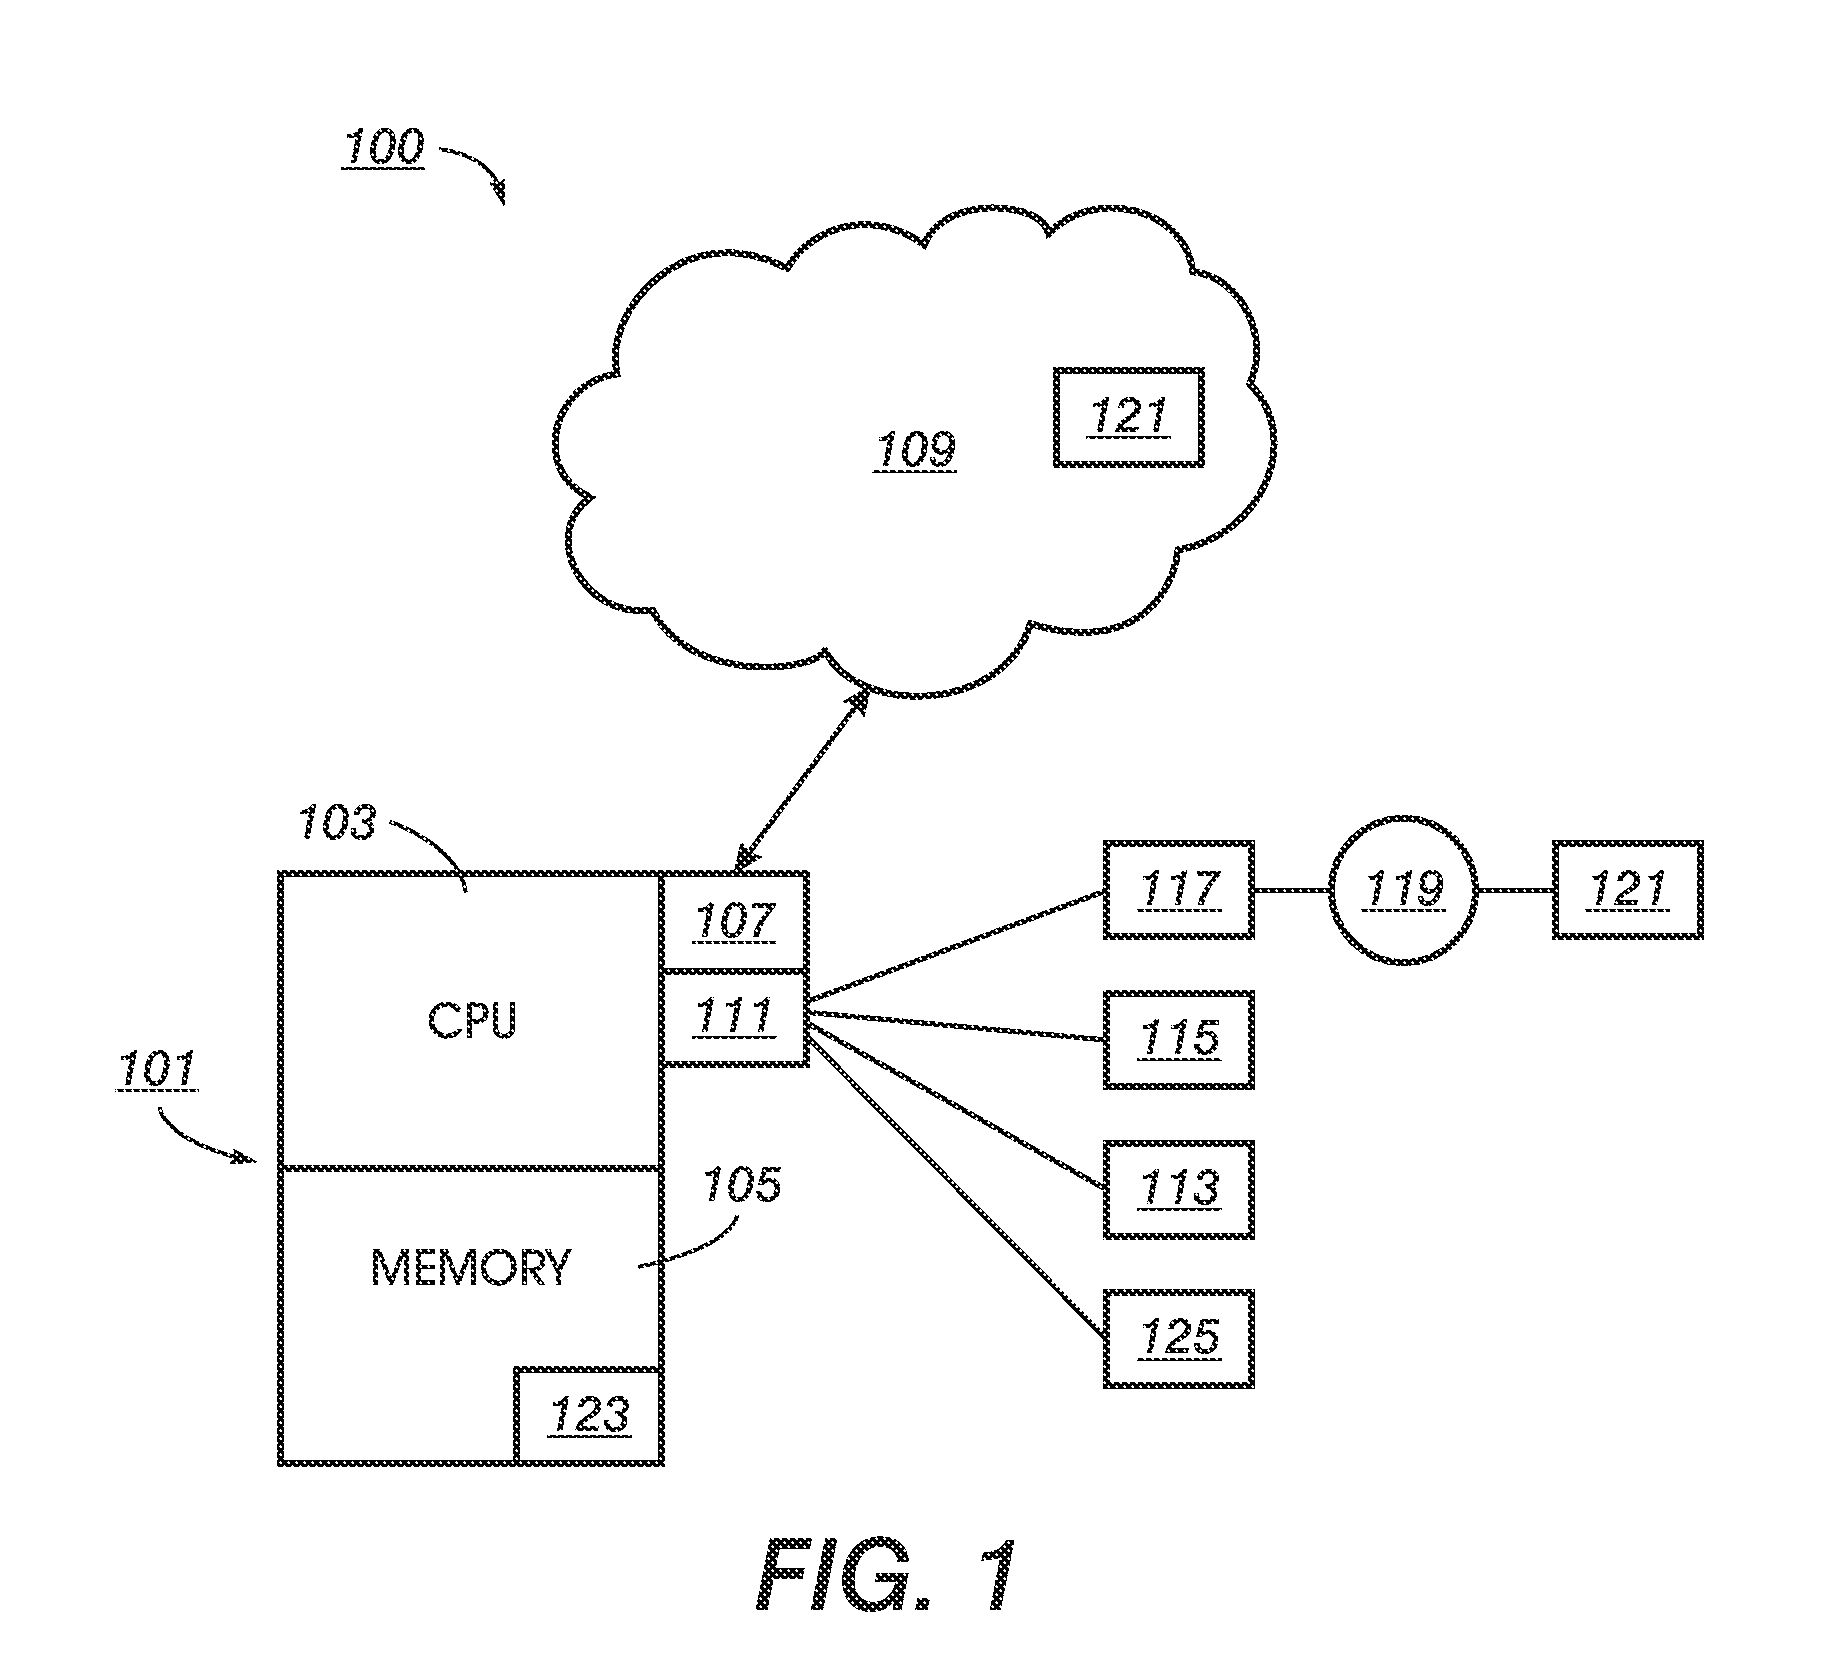 Method, Apparatus, And Program Product For Developing And Maintaining A Comprehension State Of A Collection Of Information